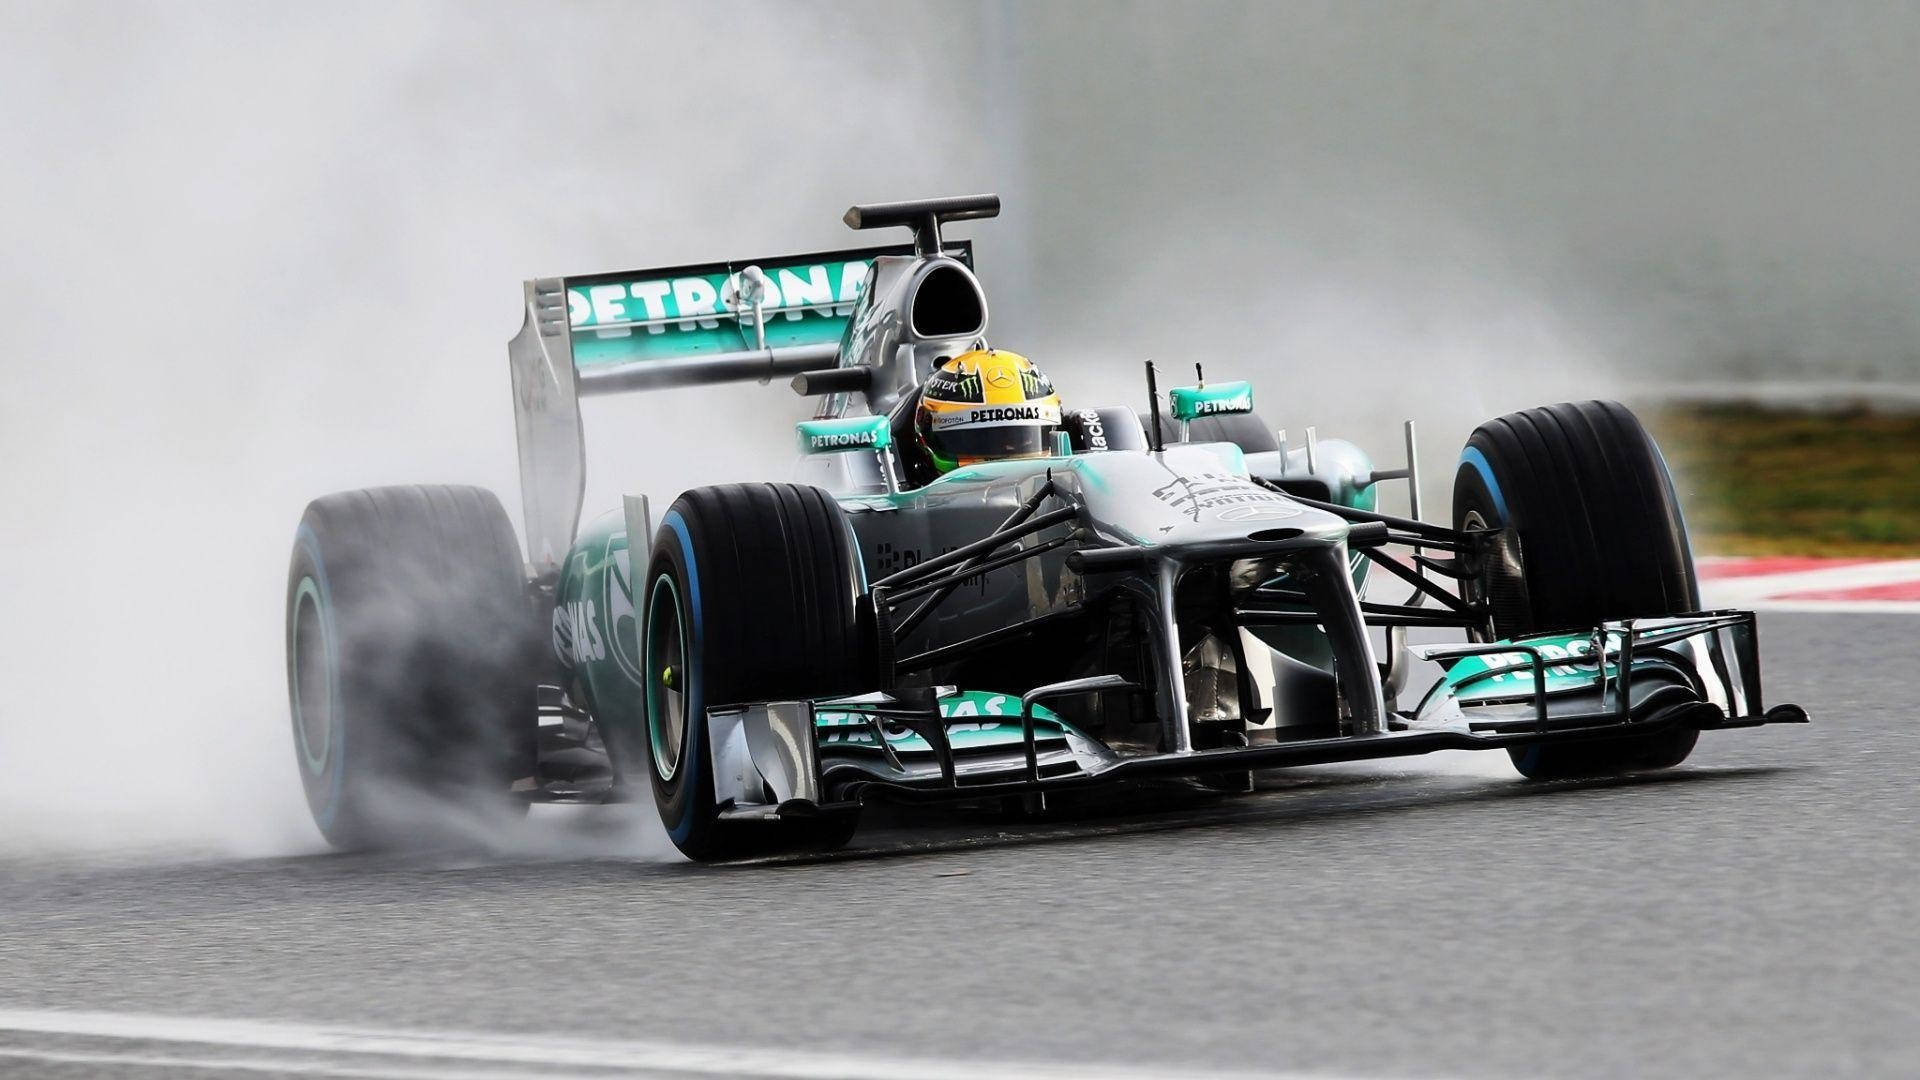 Front View Of The Mercedes Racing Car Of Hamilton F1 Wallpaper